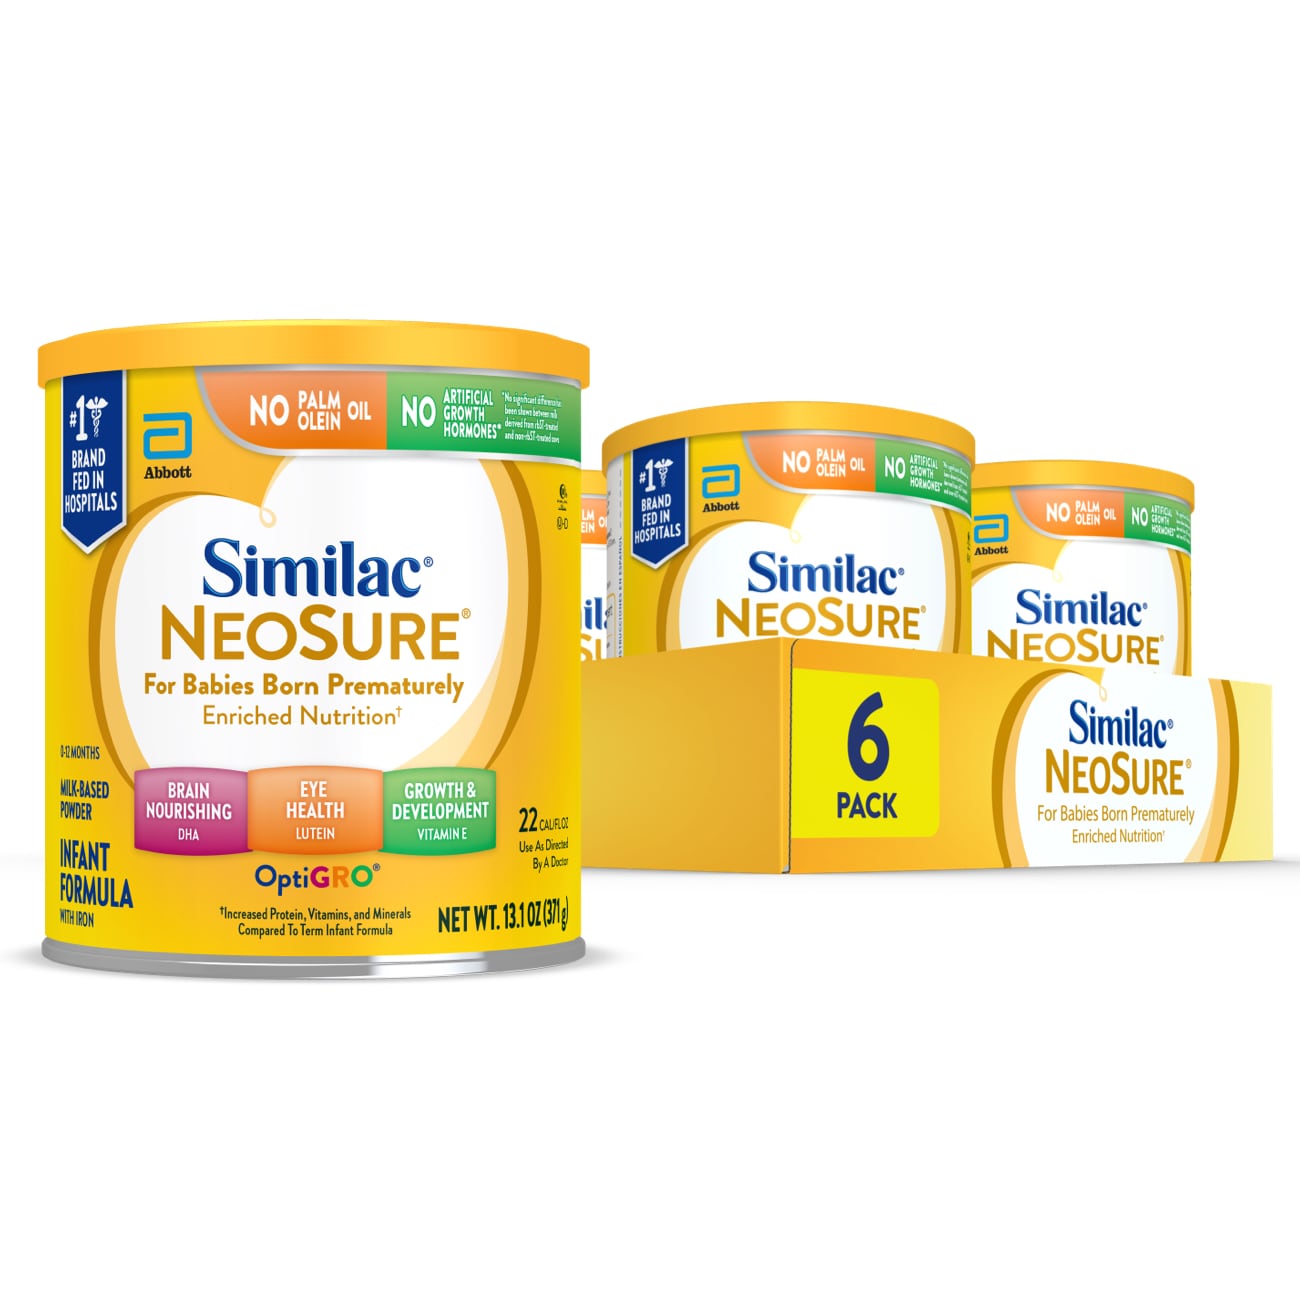 Similac NeoSure Premature Post-Discharge Powder Baby Formula, 13.1-oz Can, Pack of 6 - image 1 of 16